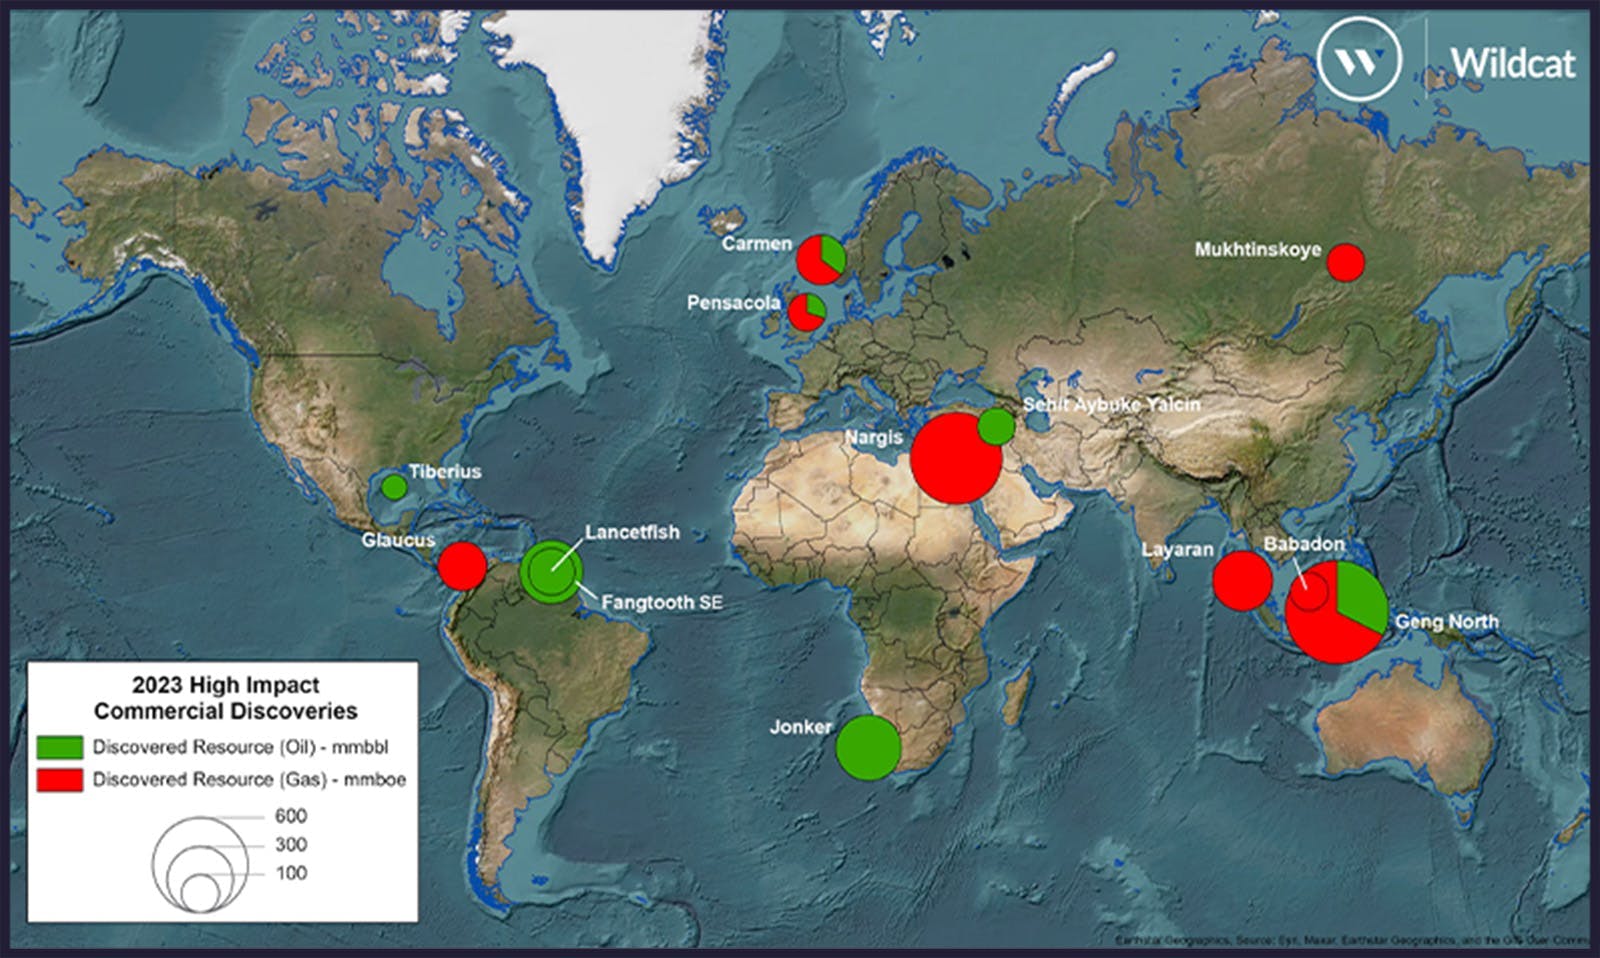 The map displays potentially commercial discoveries from the high-impact well program in 2023.